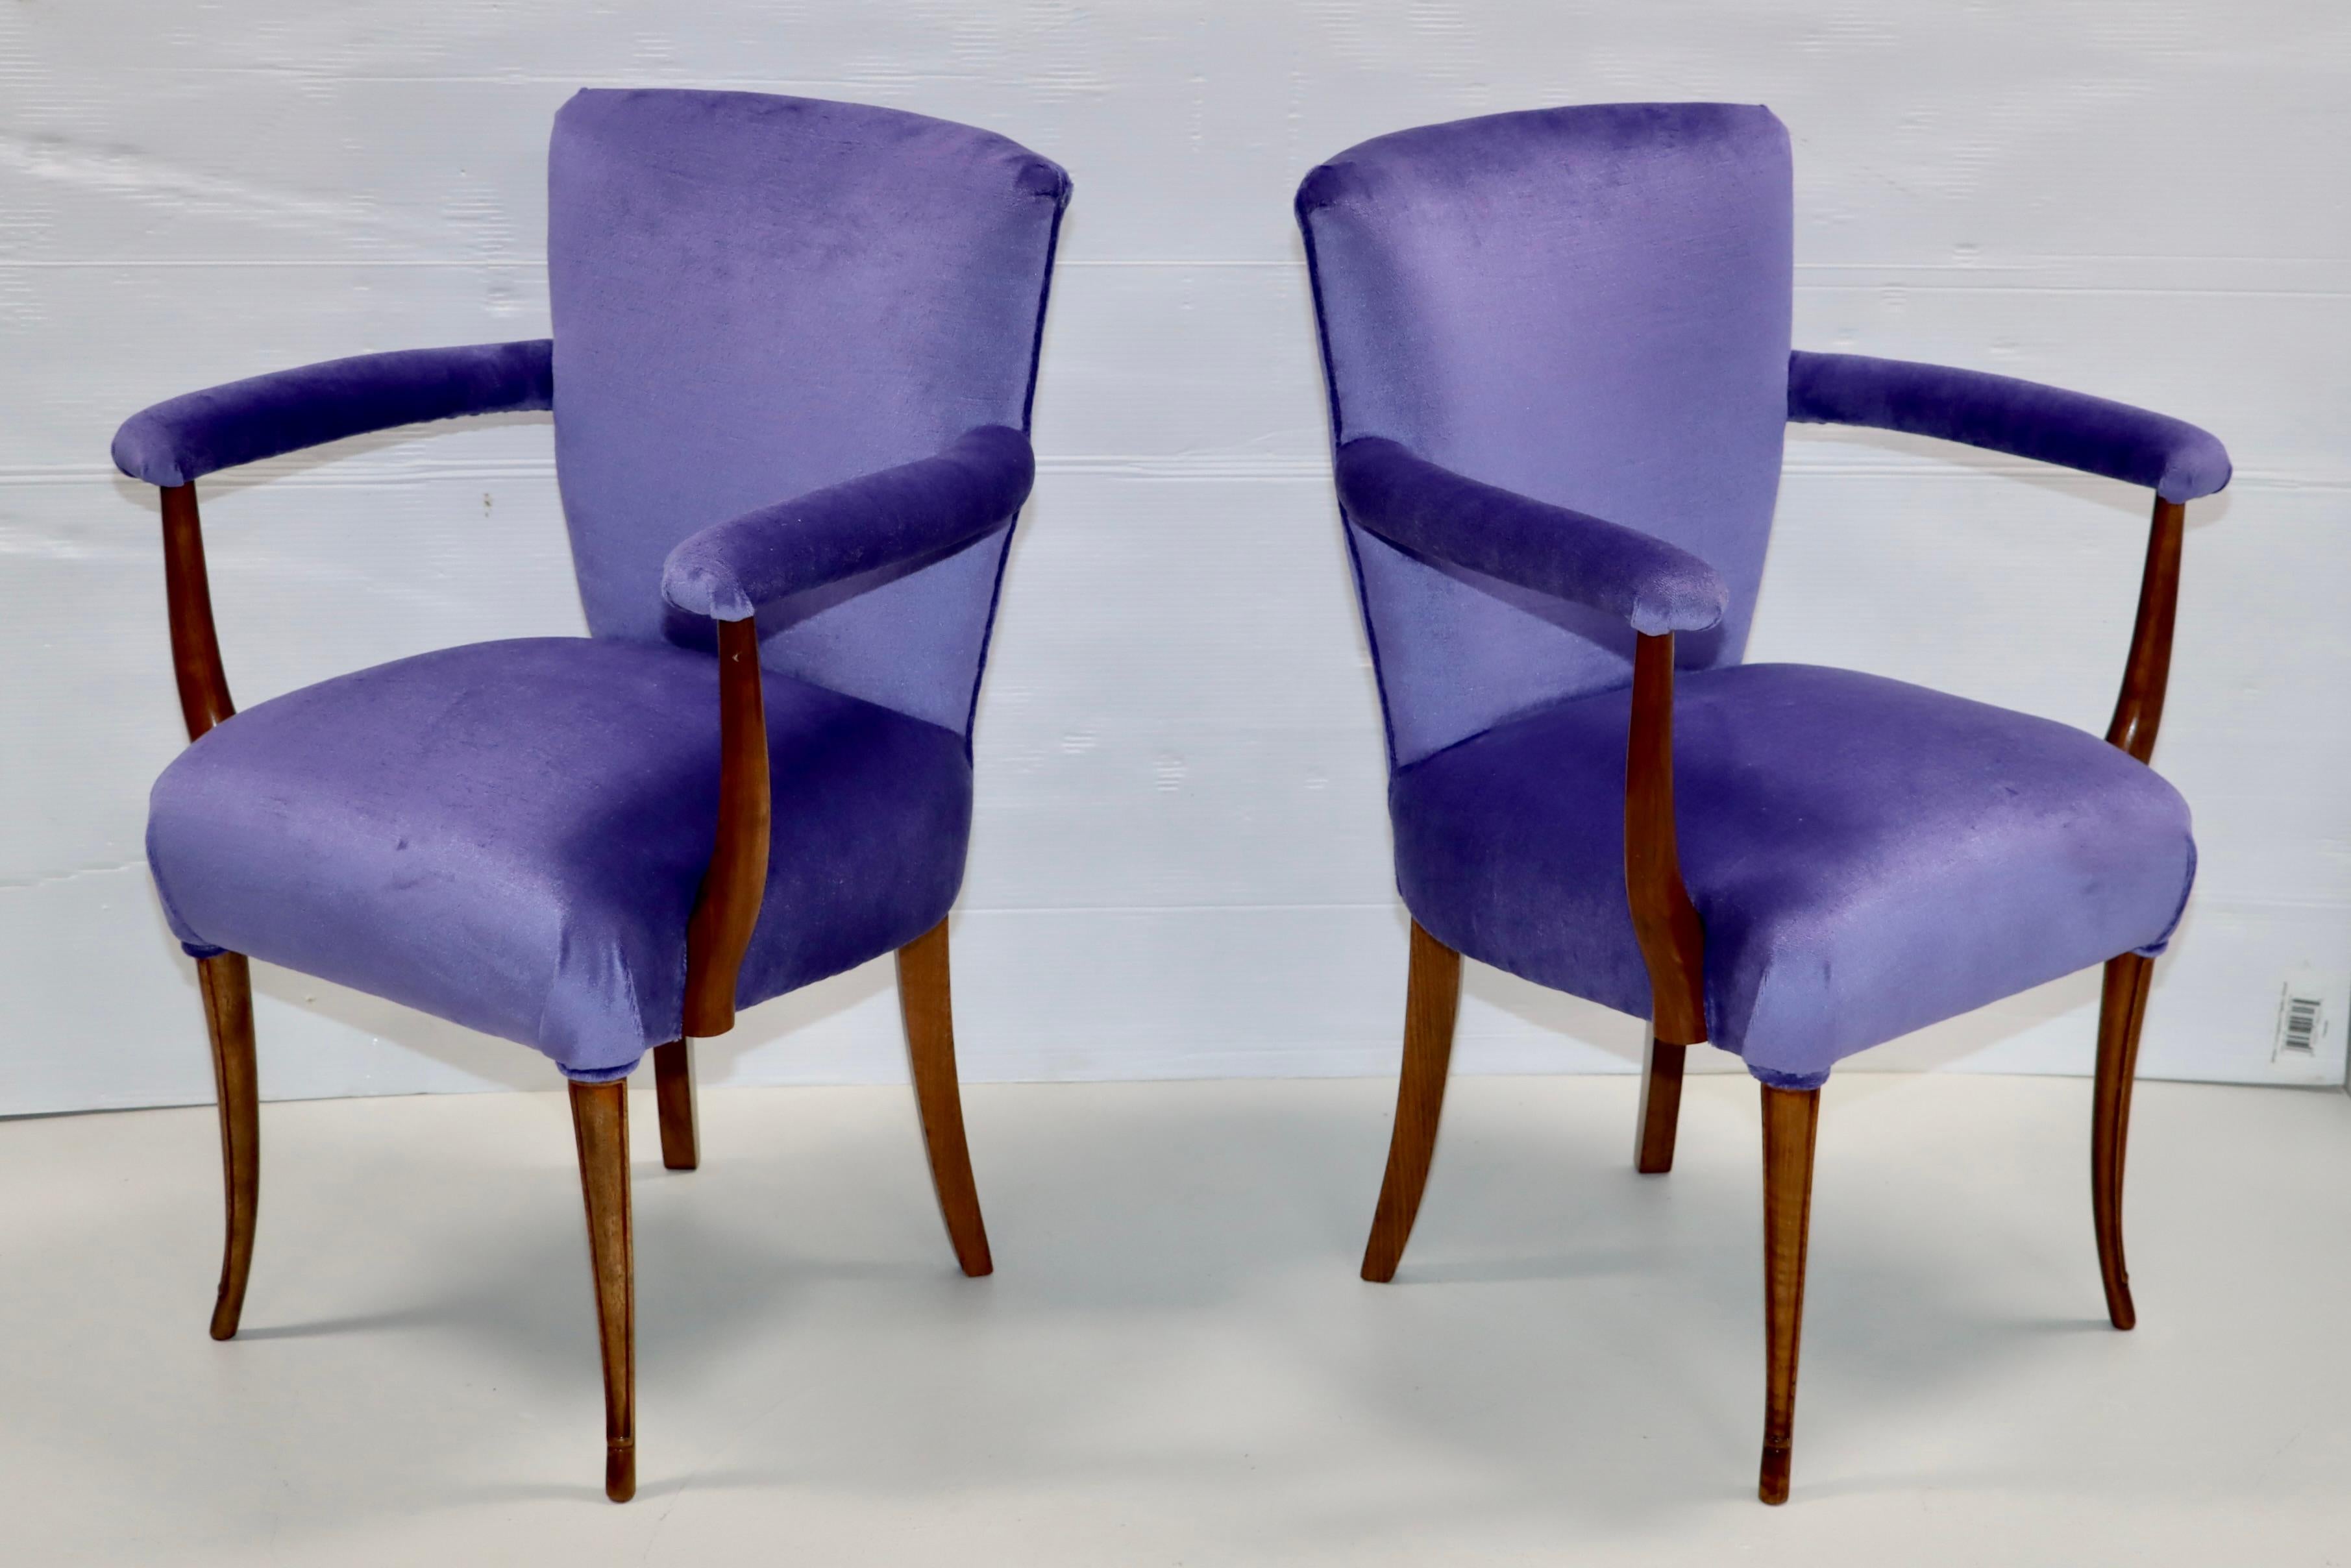 Mid-20th Century 1950's French Side Chairs With Mohair Upholstery For Sale